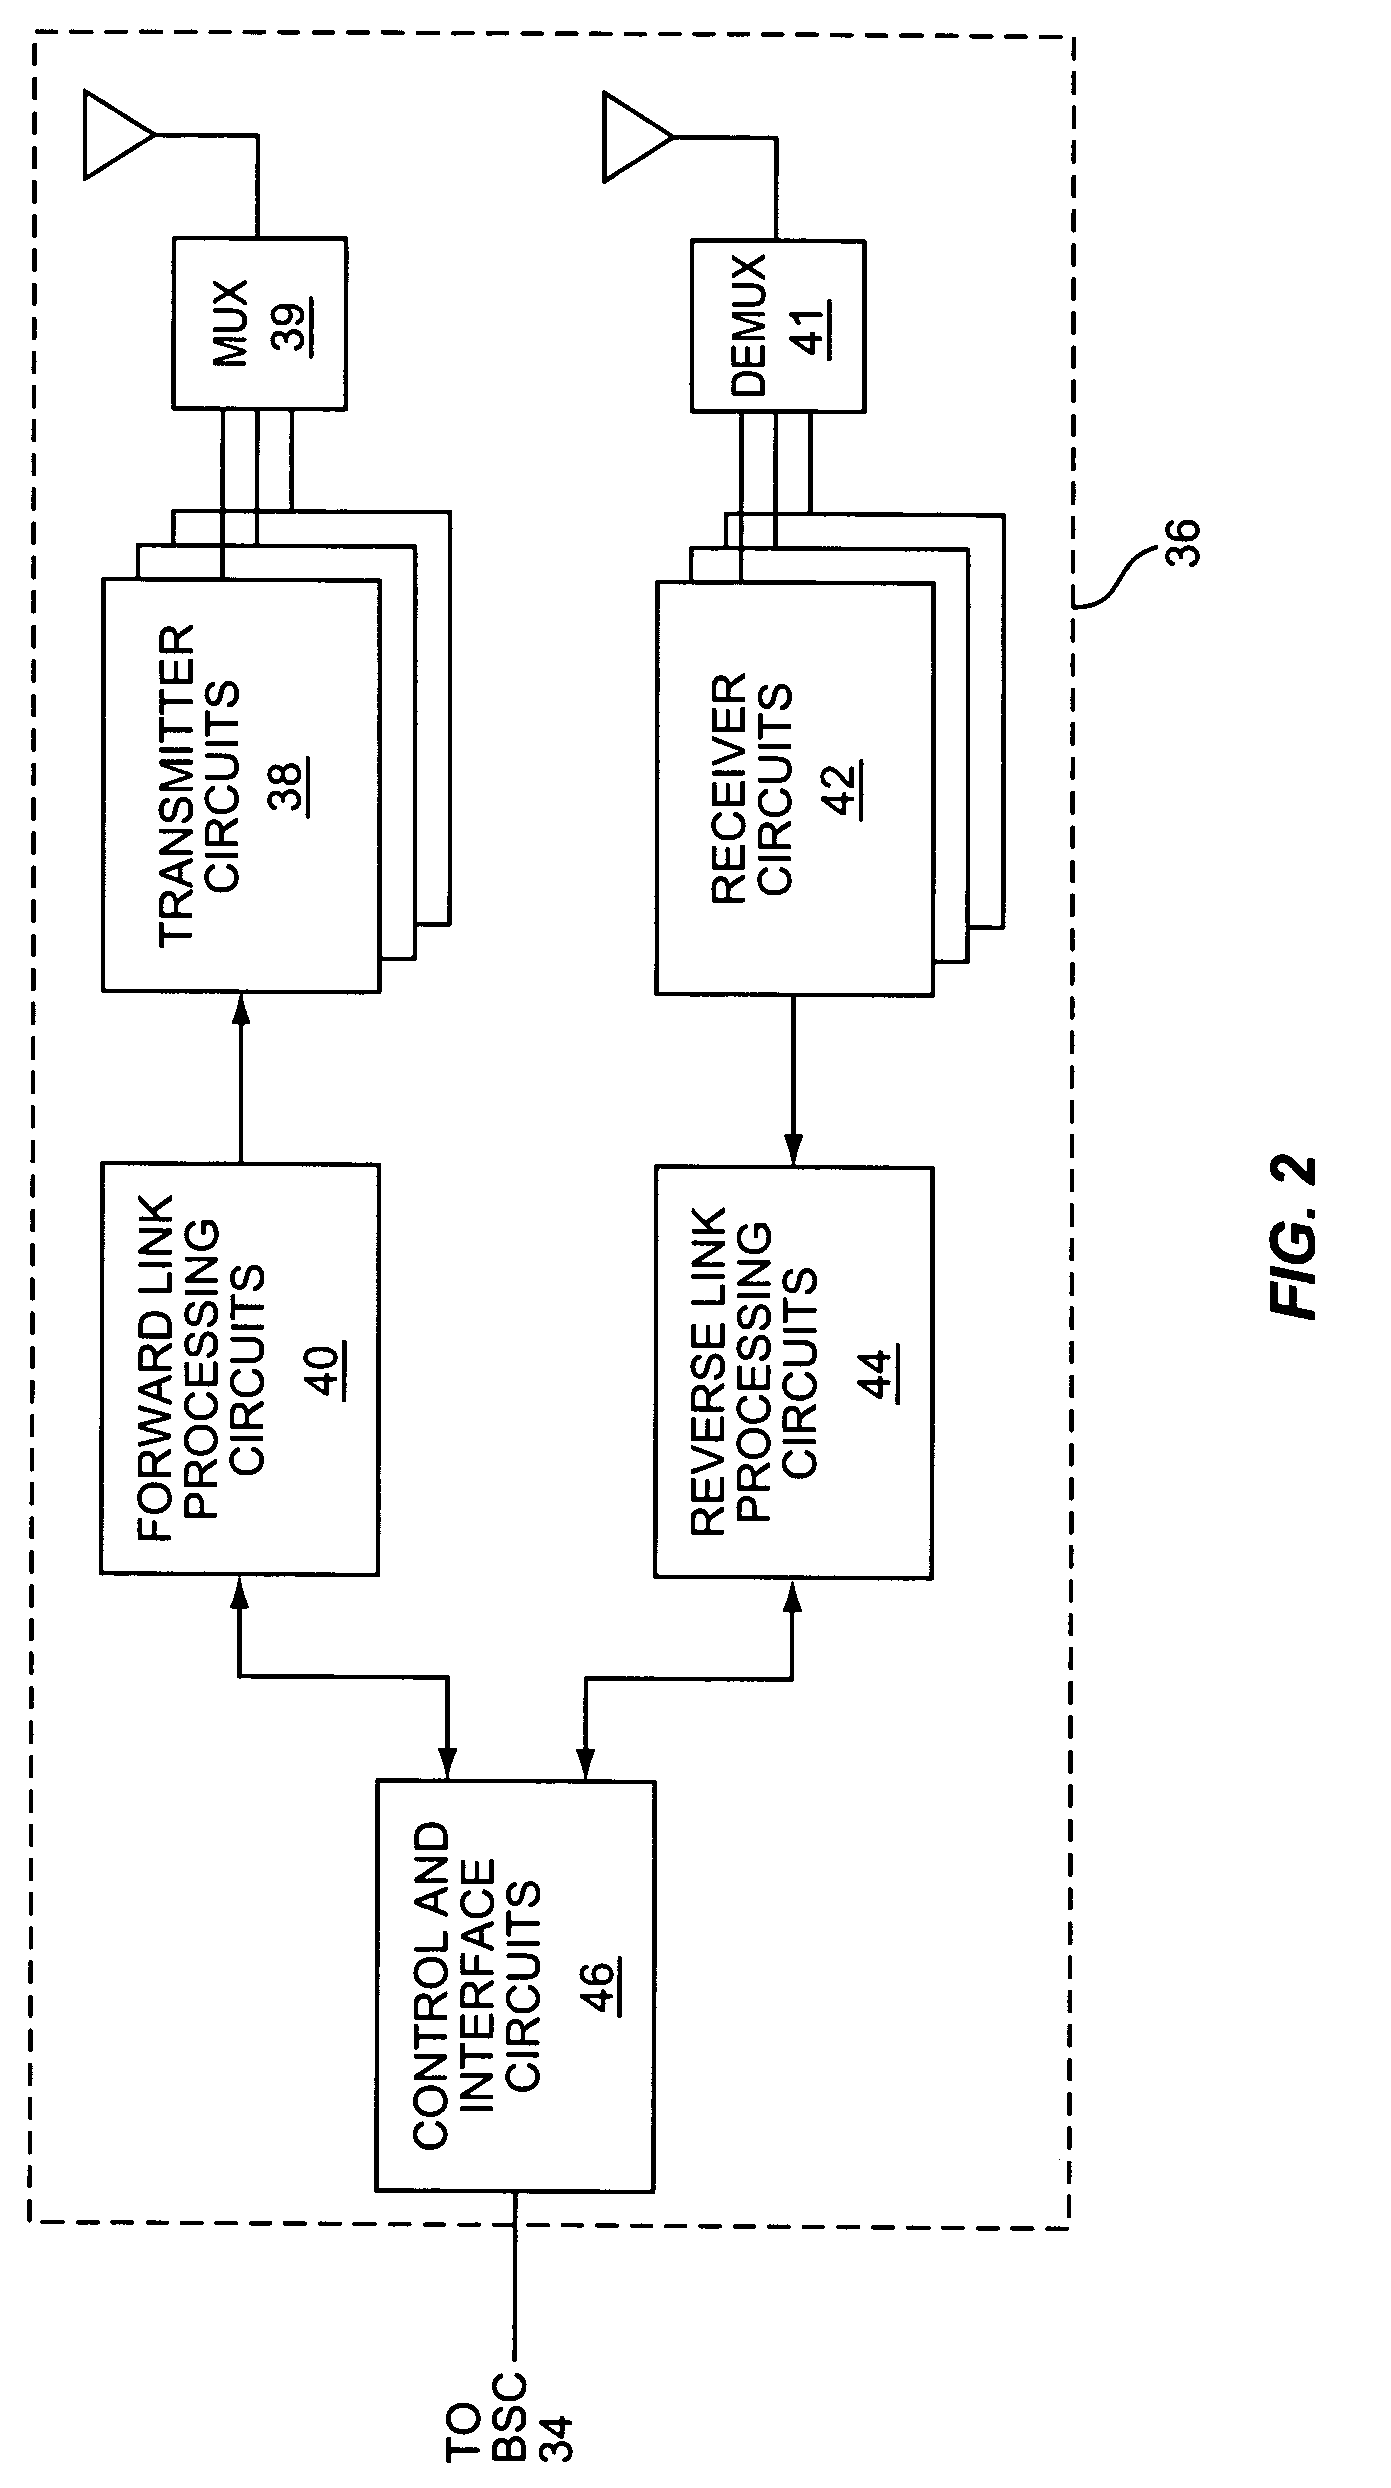 Method of rate control